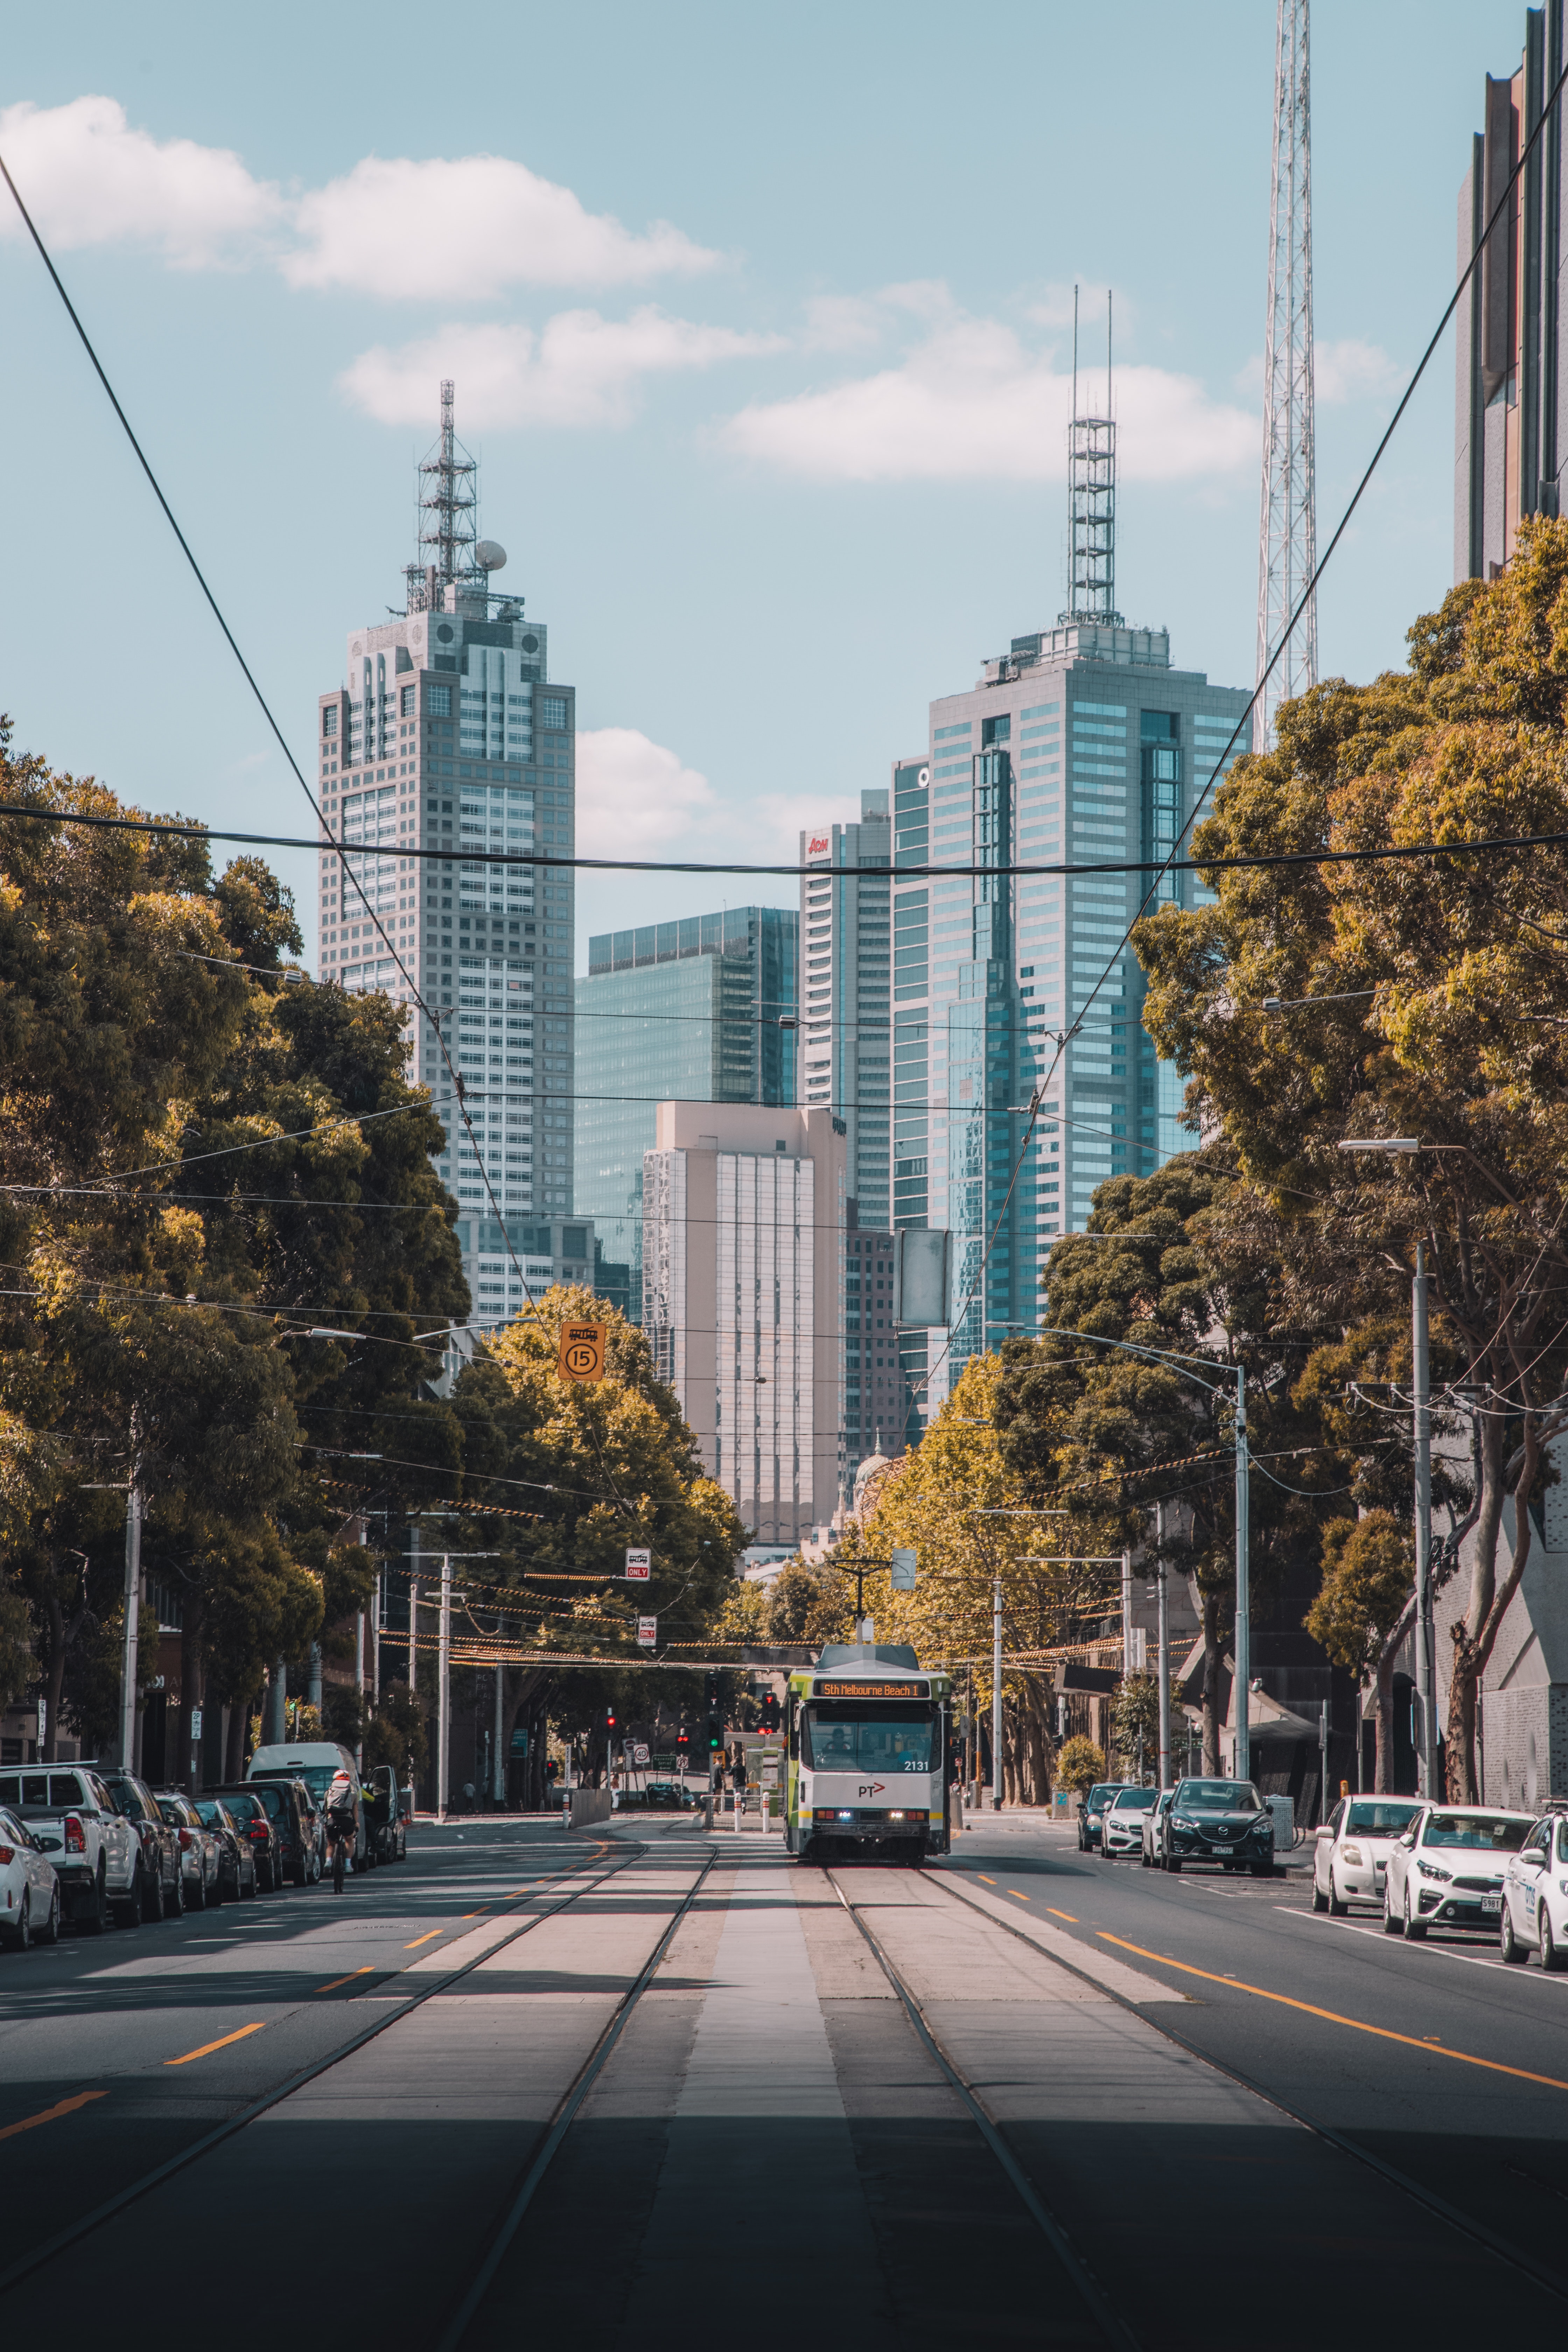 Image of Melbourne City Scape. The shot is taken with tram tracks at the forefront of the image with a tram in the centre of the composition. There are trees and cars on either side of the road and skyscrapers above. 